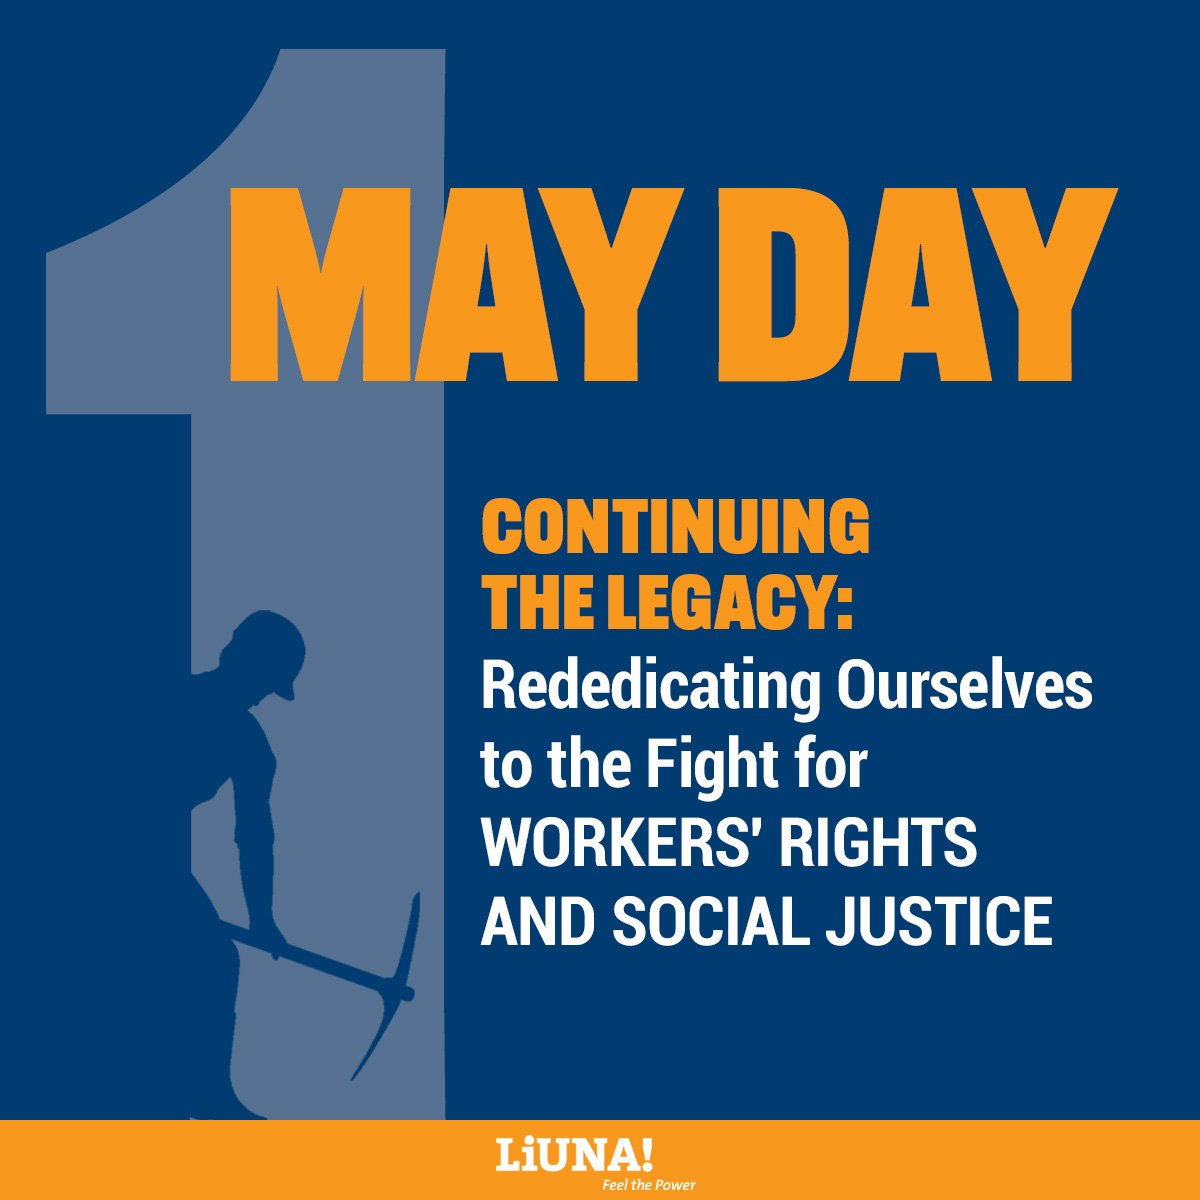 Today we celebrate the strength and resilience of workers worldwide. United, we stand for justice, dignity, and fair labor rights. ✊

#LIUNA #LIUNABuilds #Solidarity #FeelThePower